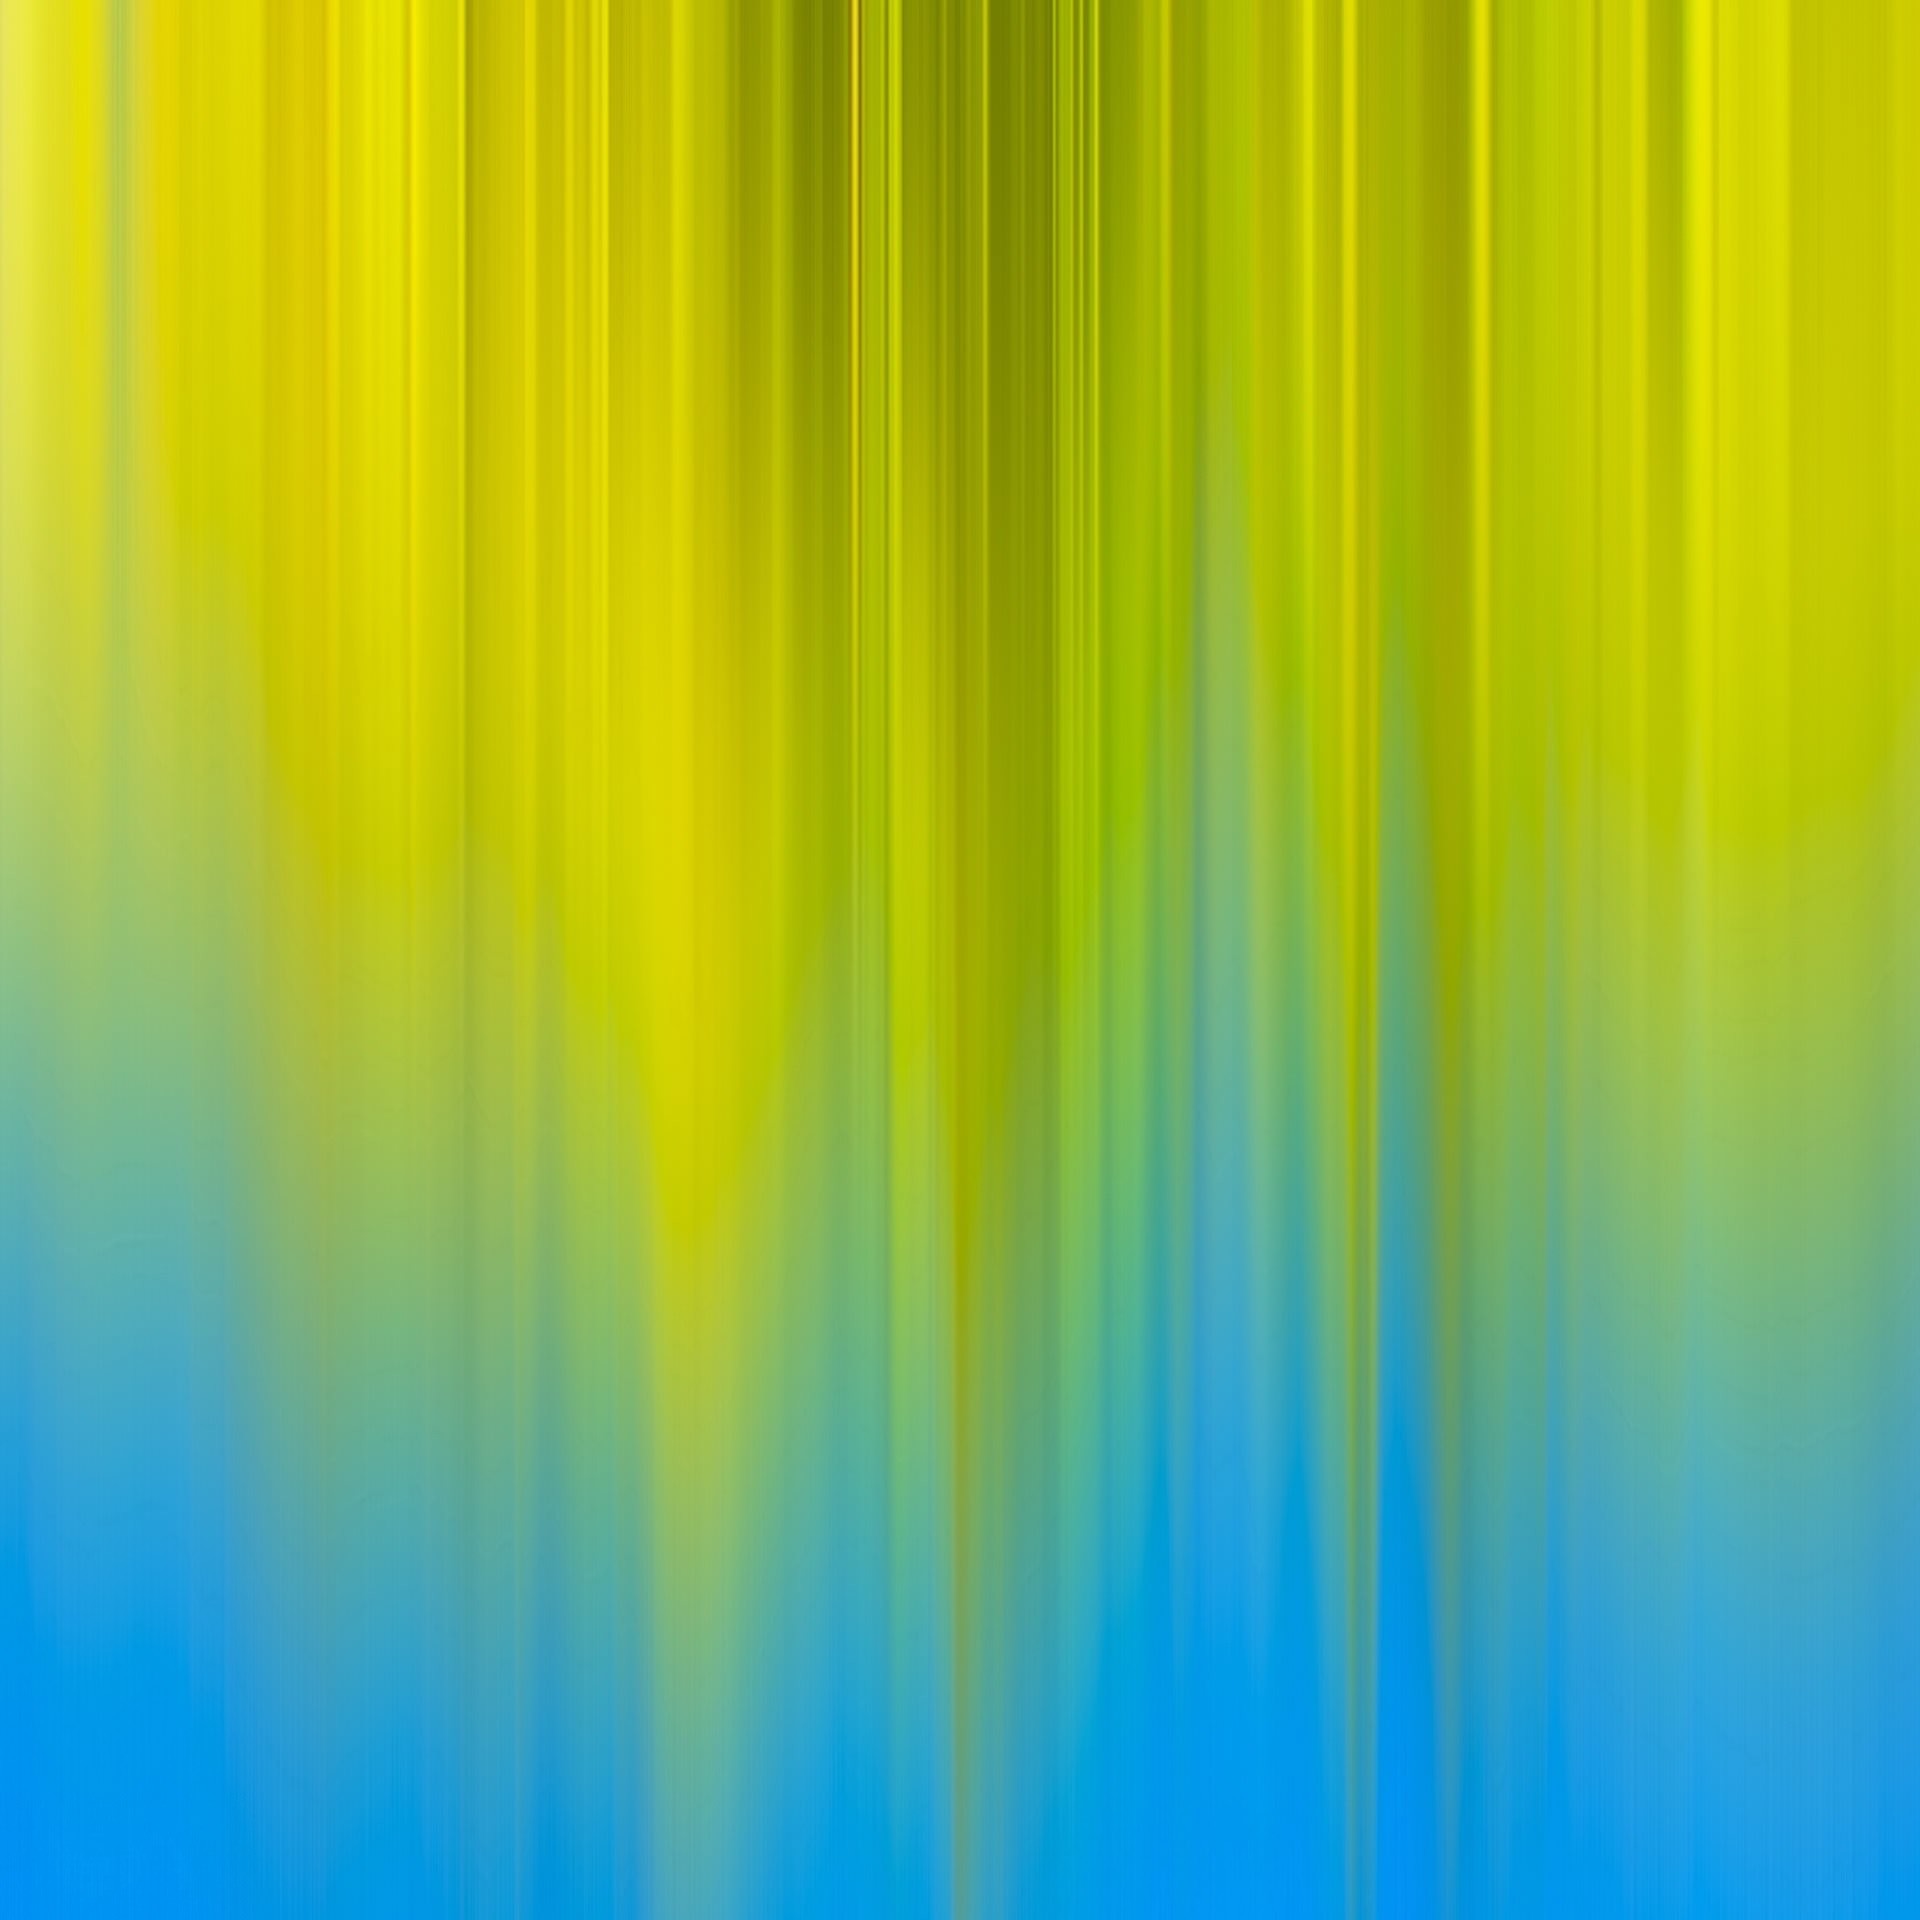 1920x1920 Pattern yellow blue Android SmartPhone Wallpaper